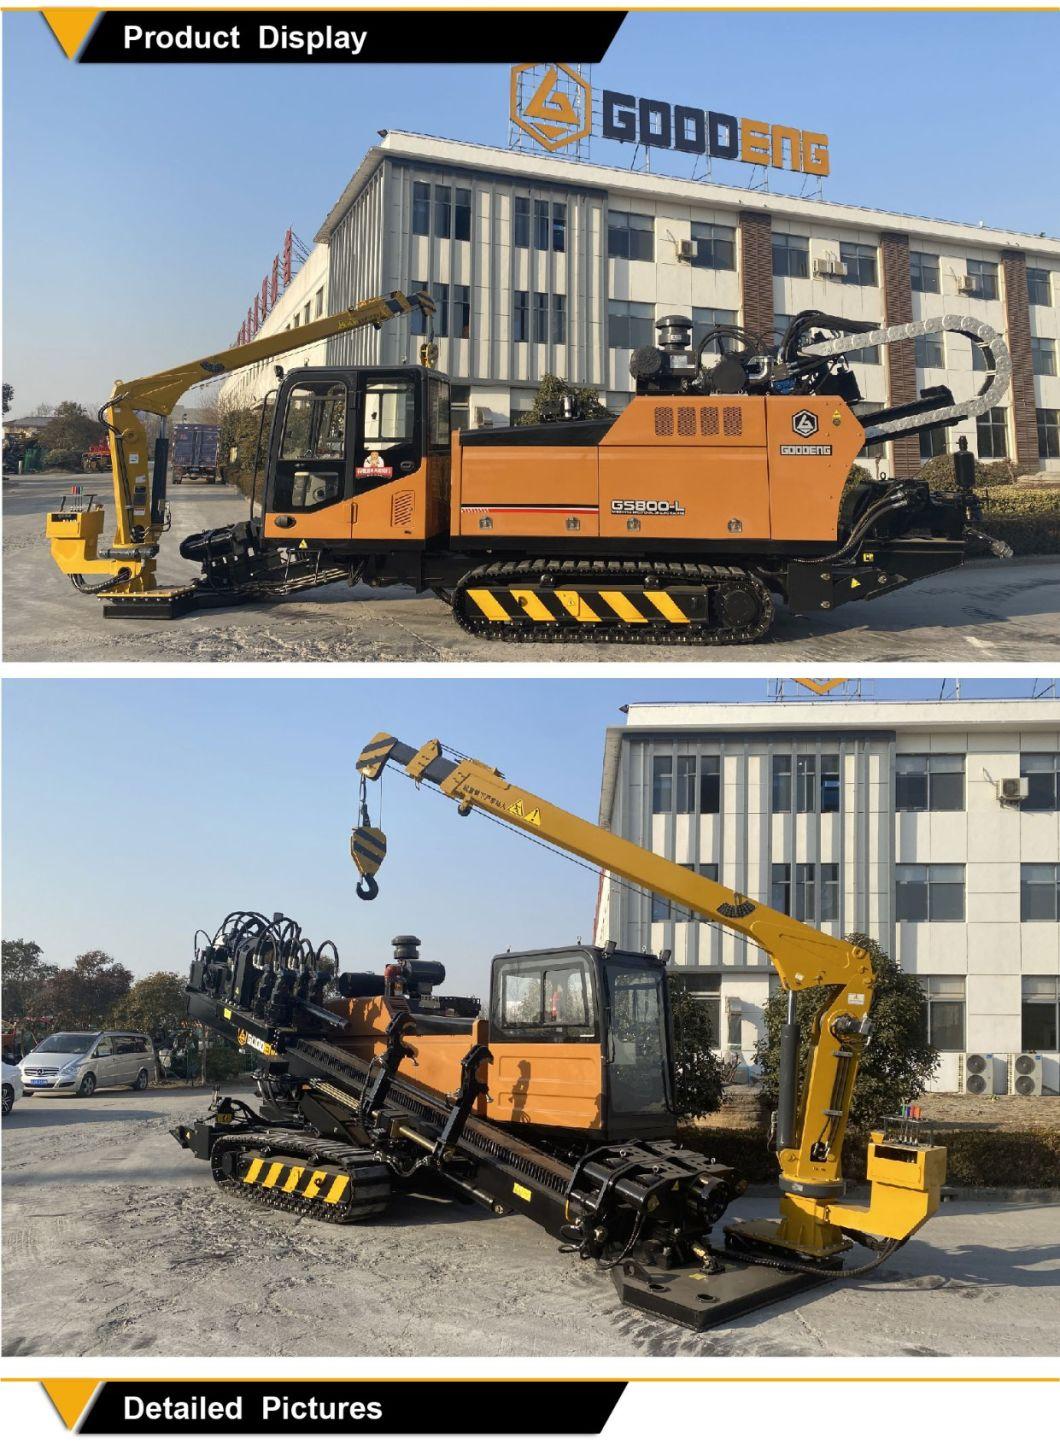 GS800-LS trenchless machine  hdd rig